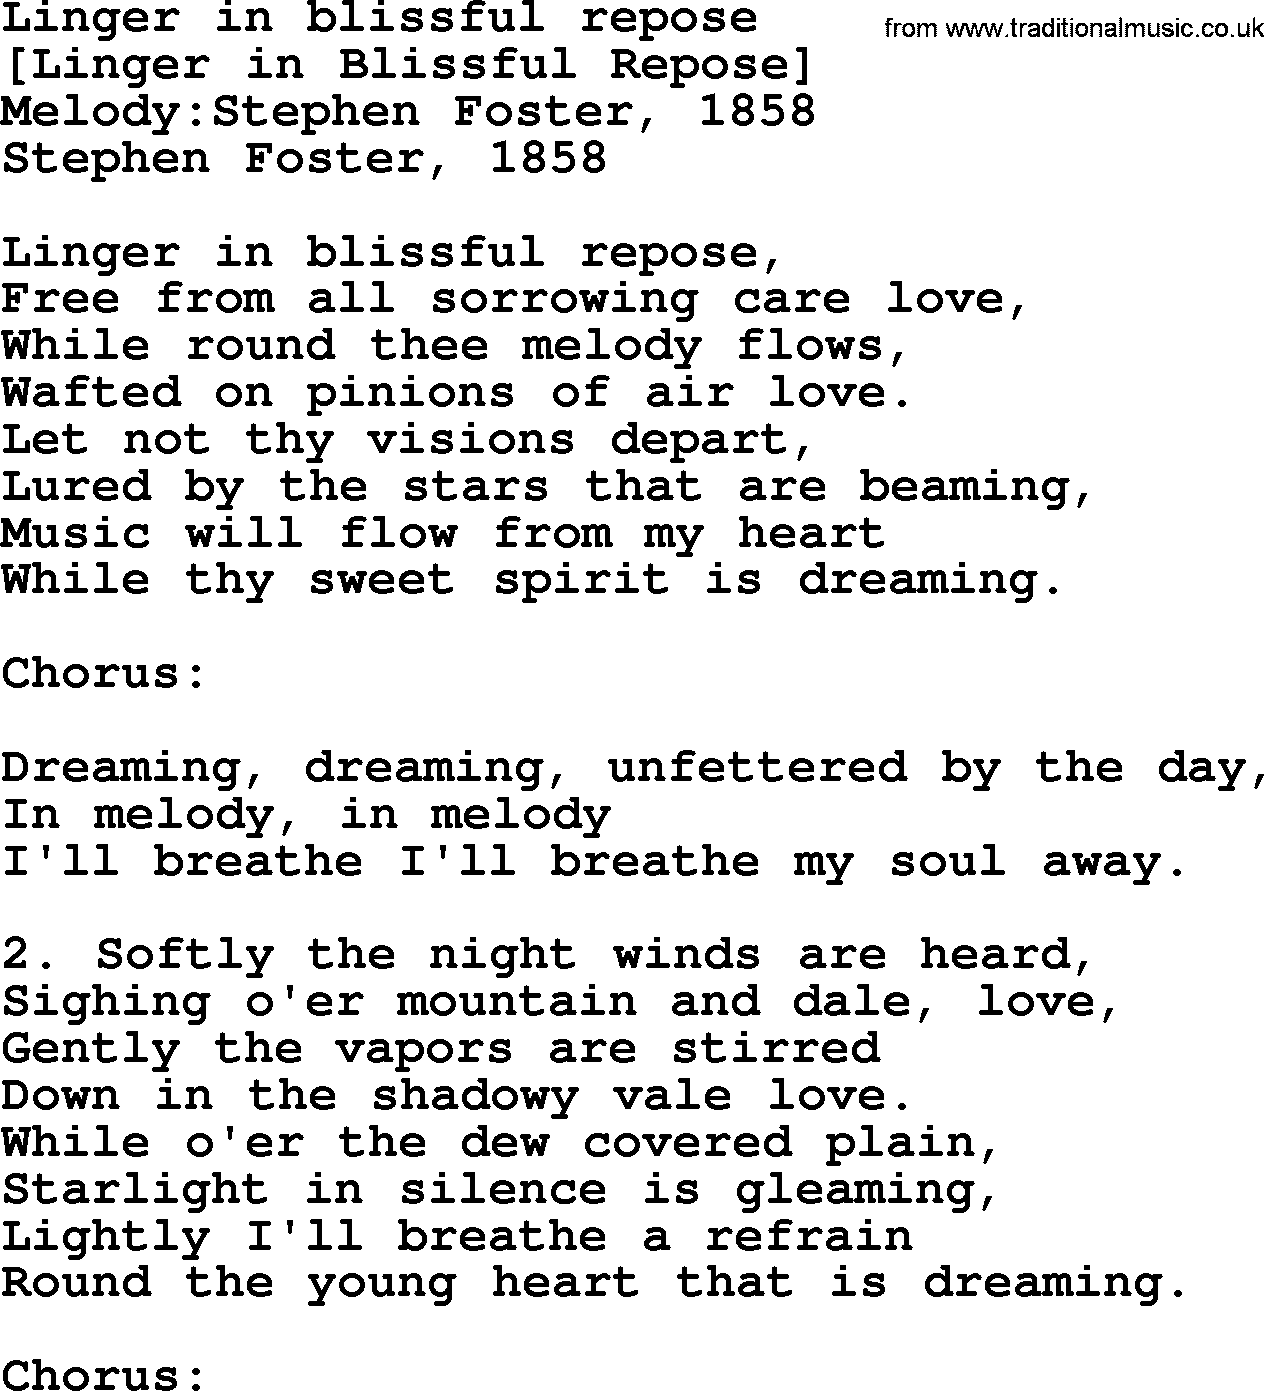 Old American Song: Linger In Blissful Repose, lyrics